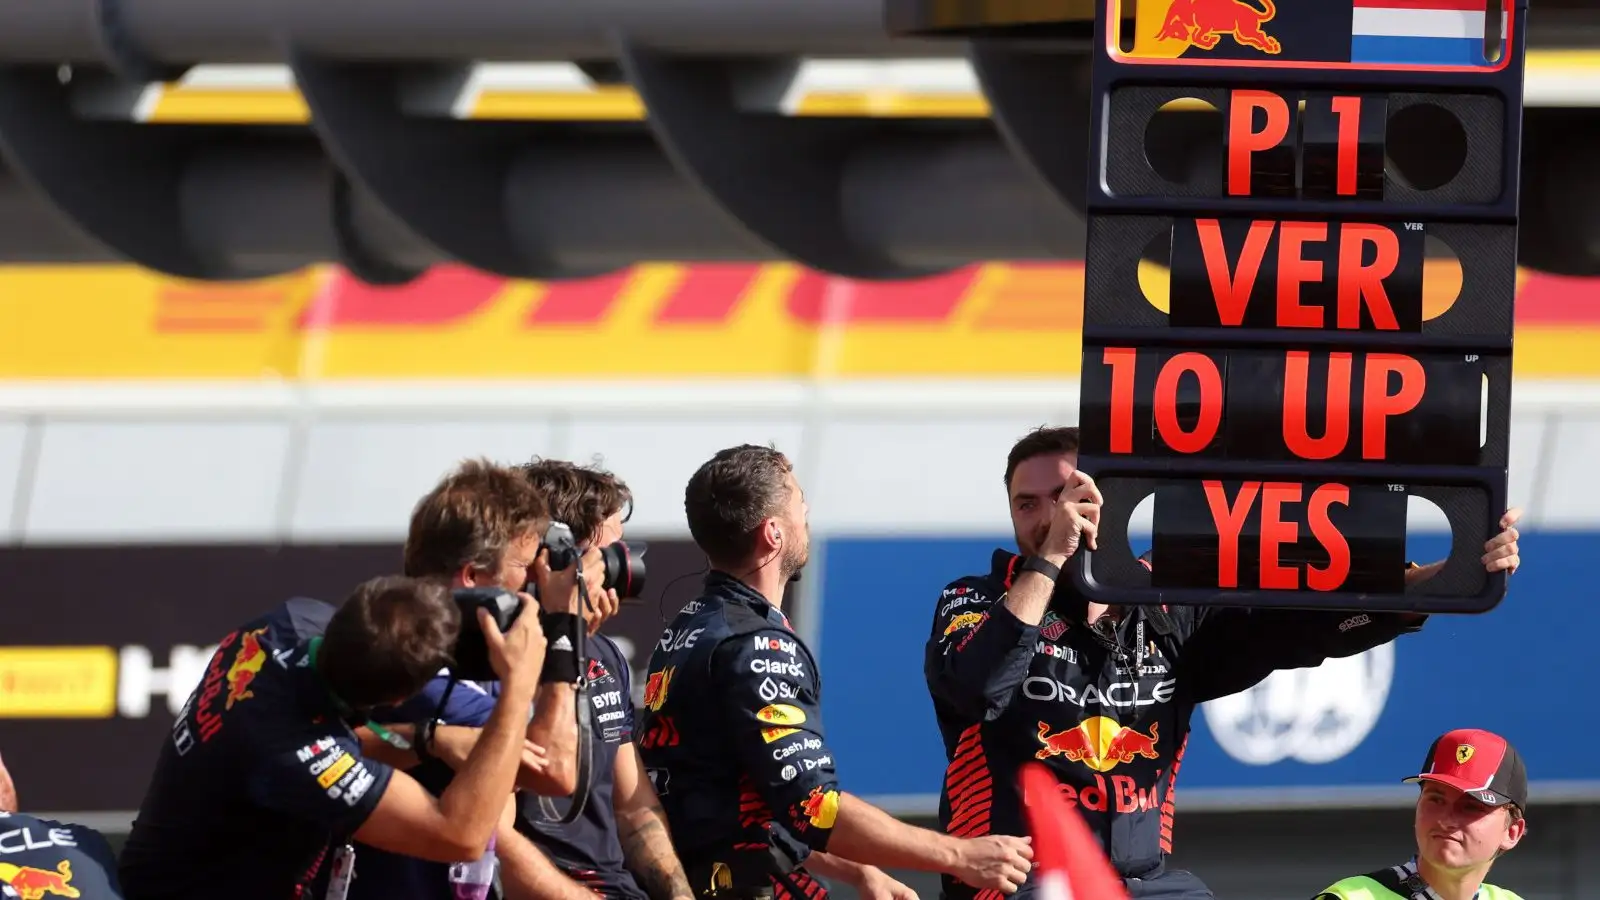 Red Bull mechanic holds up a pit board celebrating Max Verstappen's 10th successive win, a new F1 record.